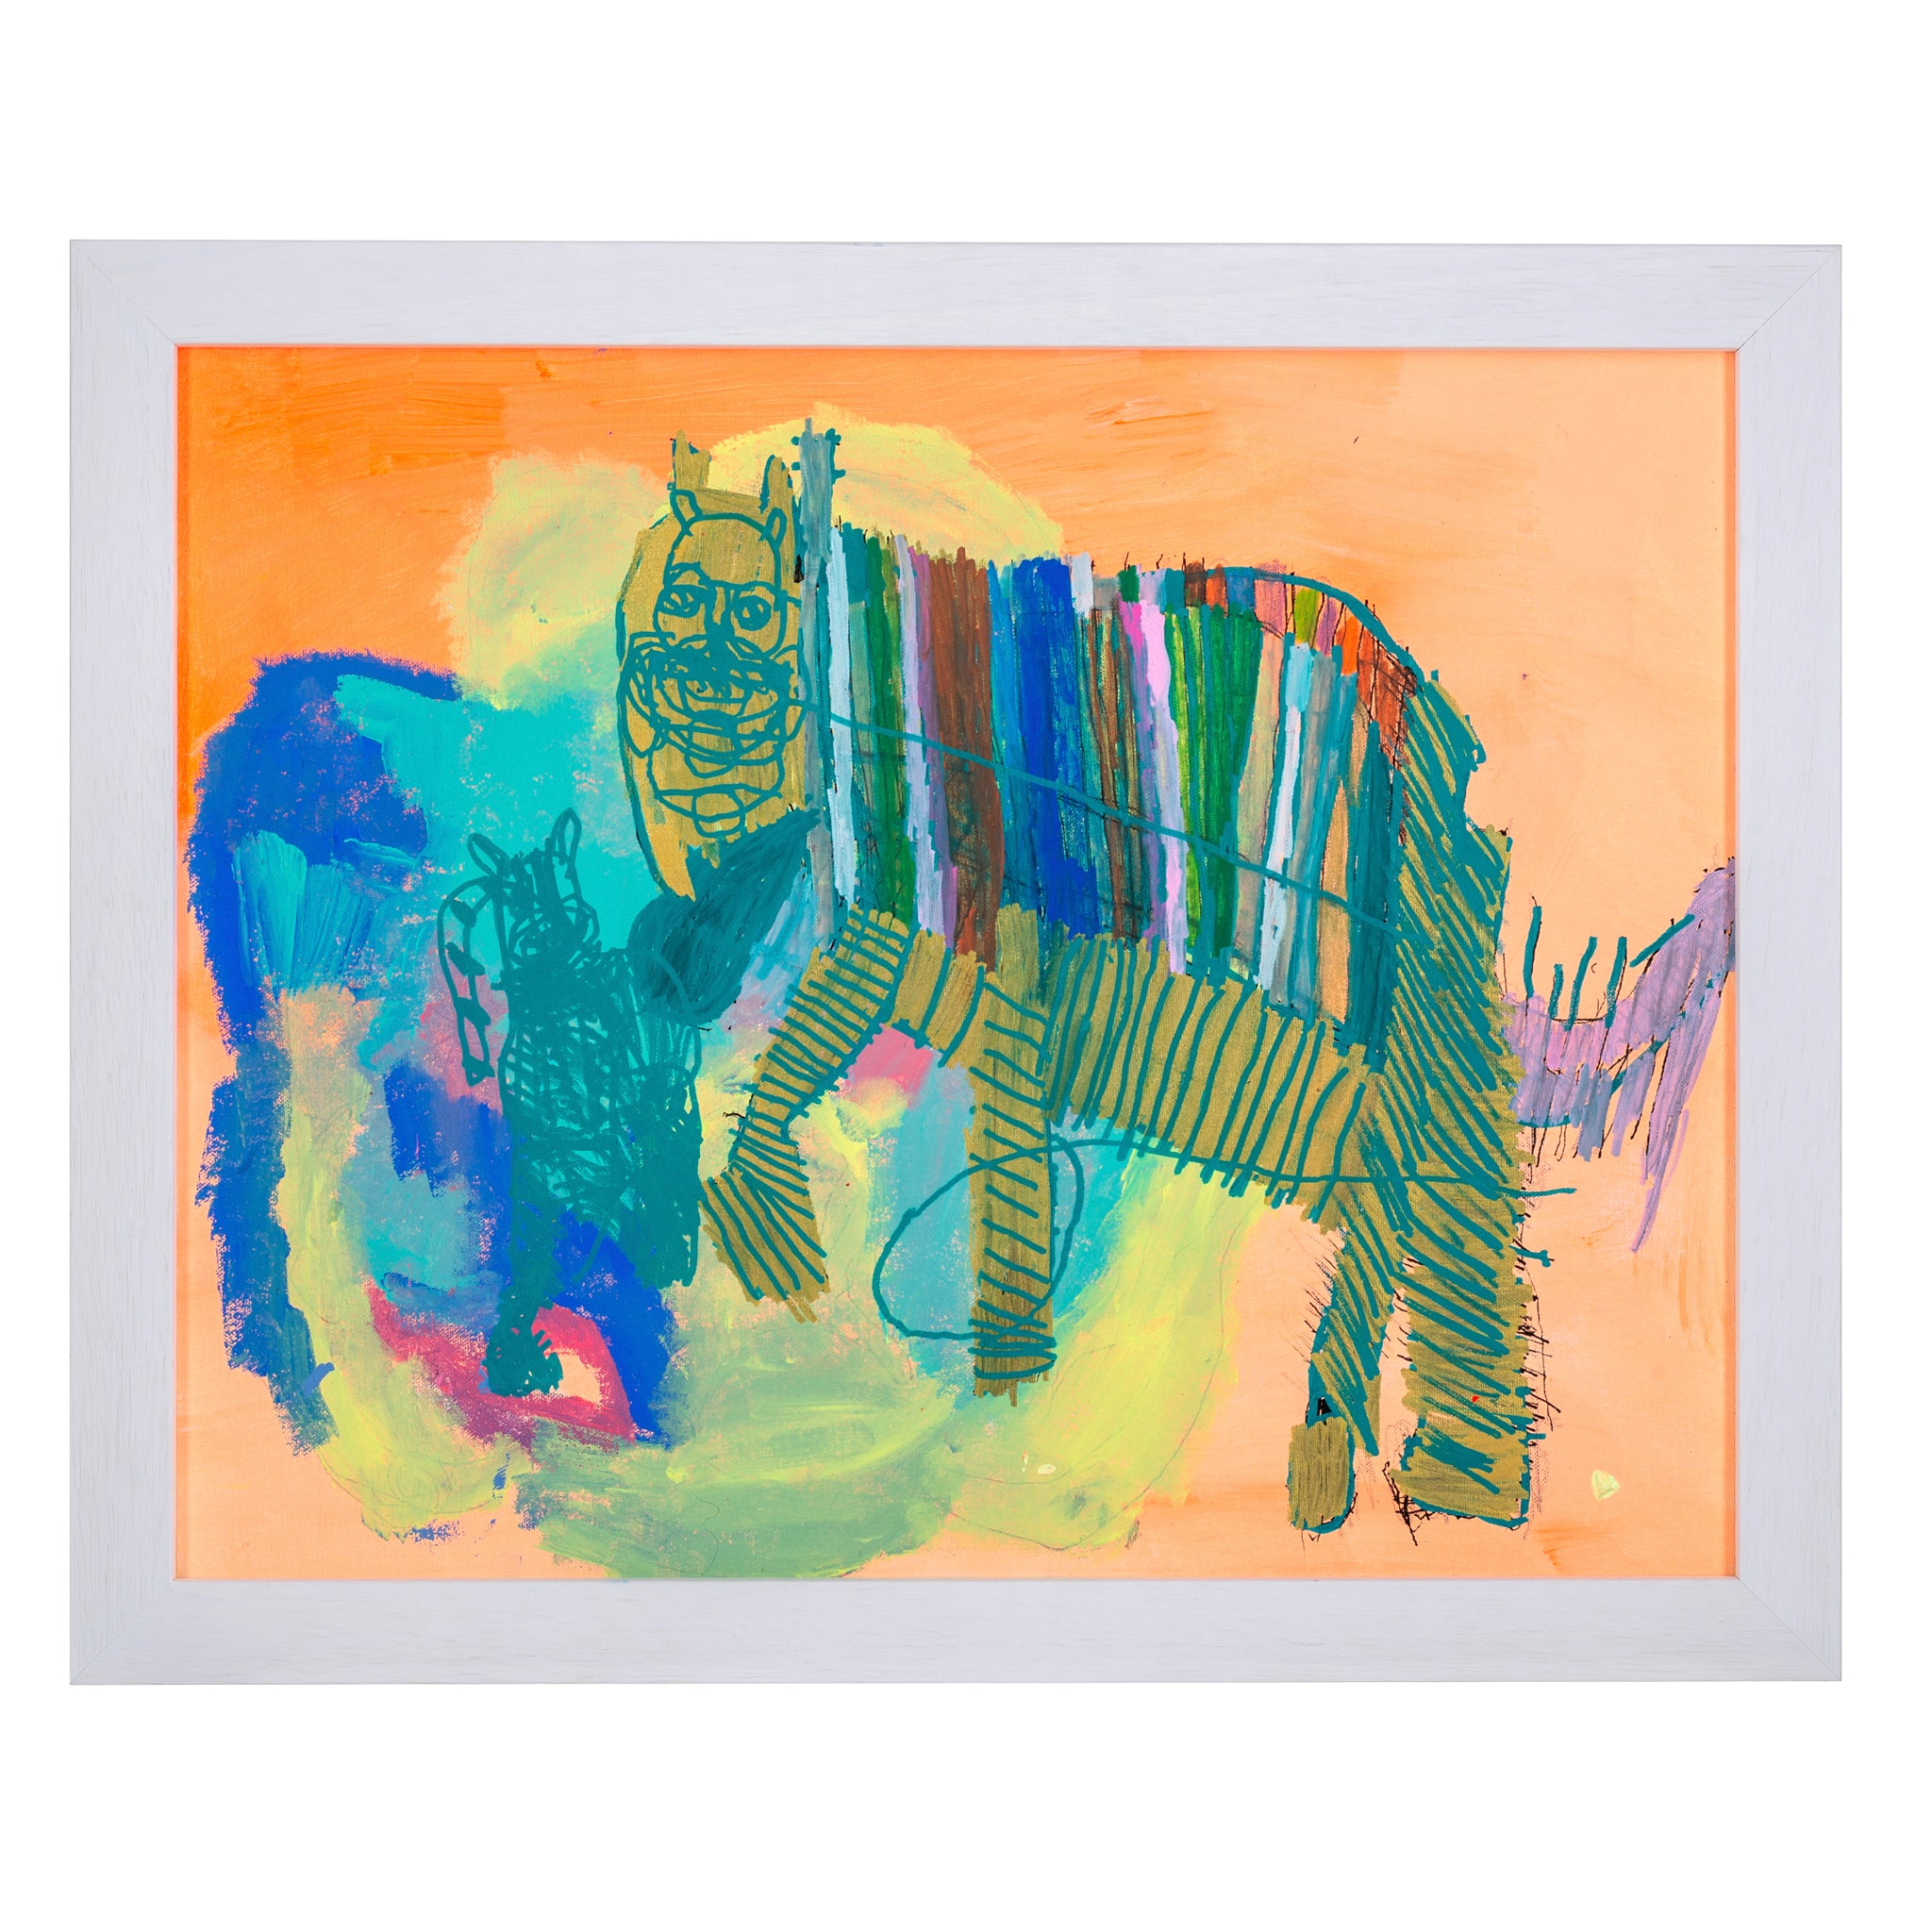 Framed painting of a striped creature in blues and oranges called Wild Sunrise